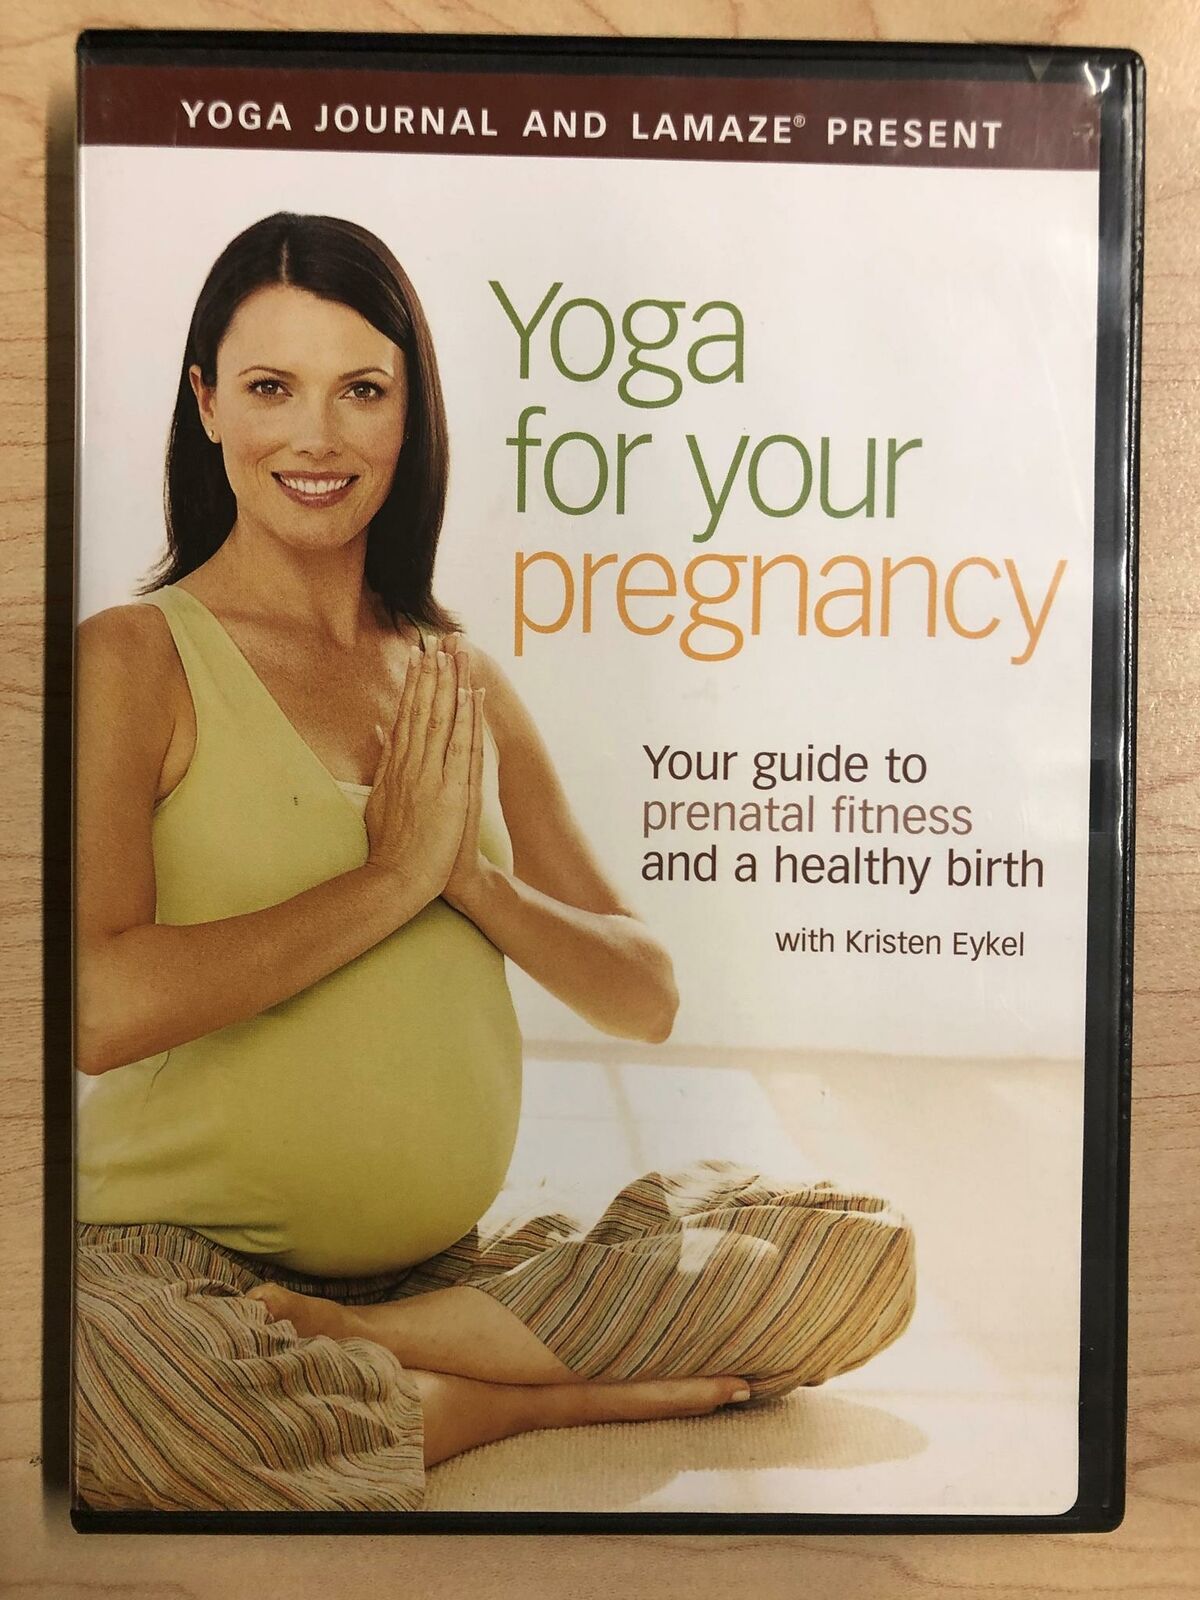 Yoga for Your Pregnancy with Kristen Eykel (DVD, 2004, exercise) - I1030